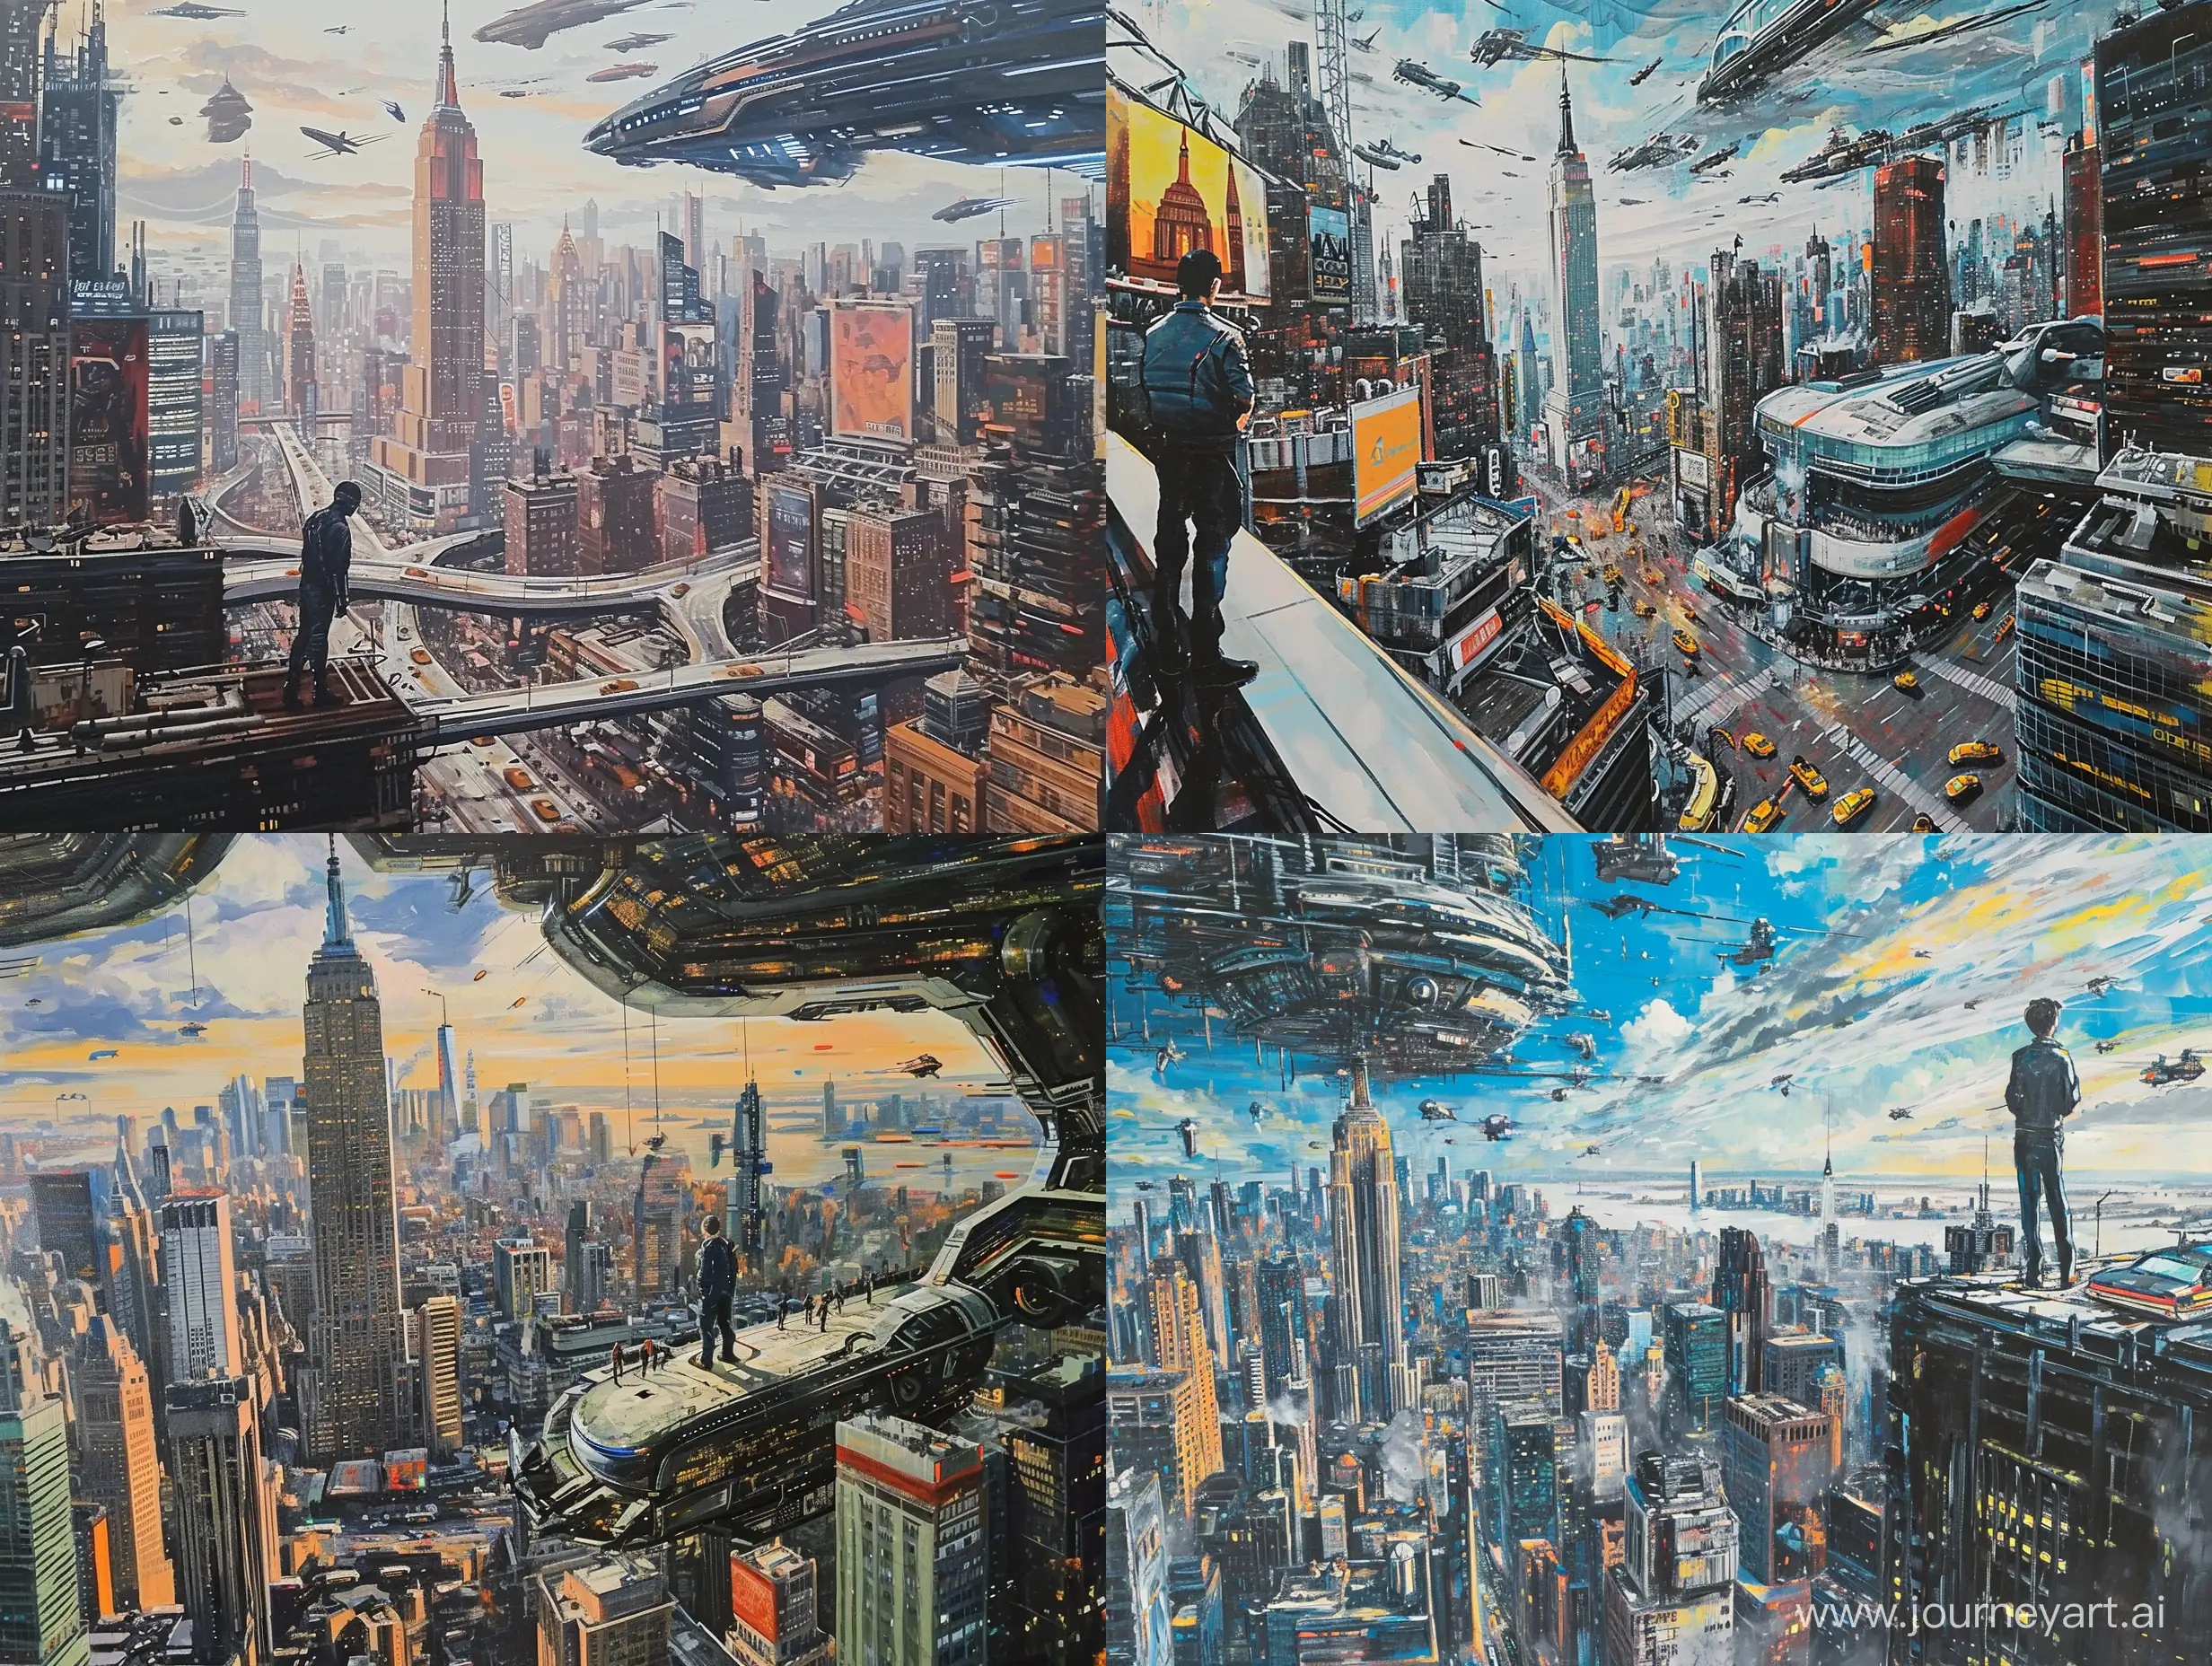 Futuristic-Science-Fiction-Cityscape-with-Empire-State-Building-View